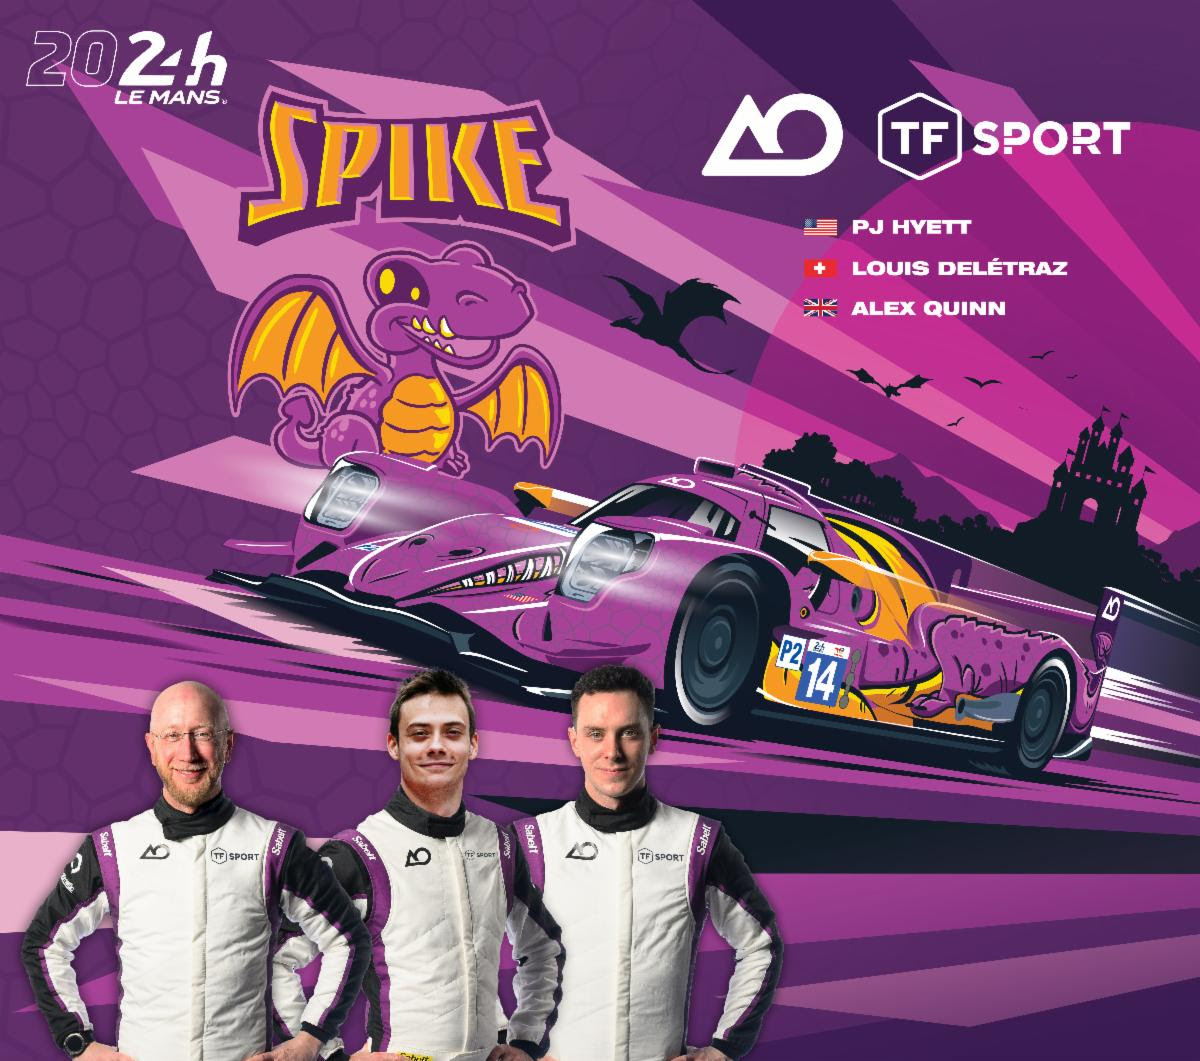 SPIKE TO LE MANS 🐉💜

Last year 'Rexy' took to the 24h, this year AO by TF will bring the 'Spike' LMP2 to the grid.

The #14 will race in the LMP2 Pro-Am class, carrying the purple colours from AO's IMSA entry.

🇺🇸 PJ. Hyett
🇨🇭 L. Deletraz
🇬🇧 A. Quinn

@AORacingUSA | #LeMans24